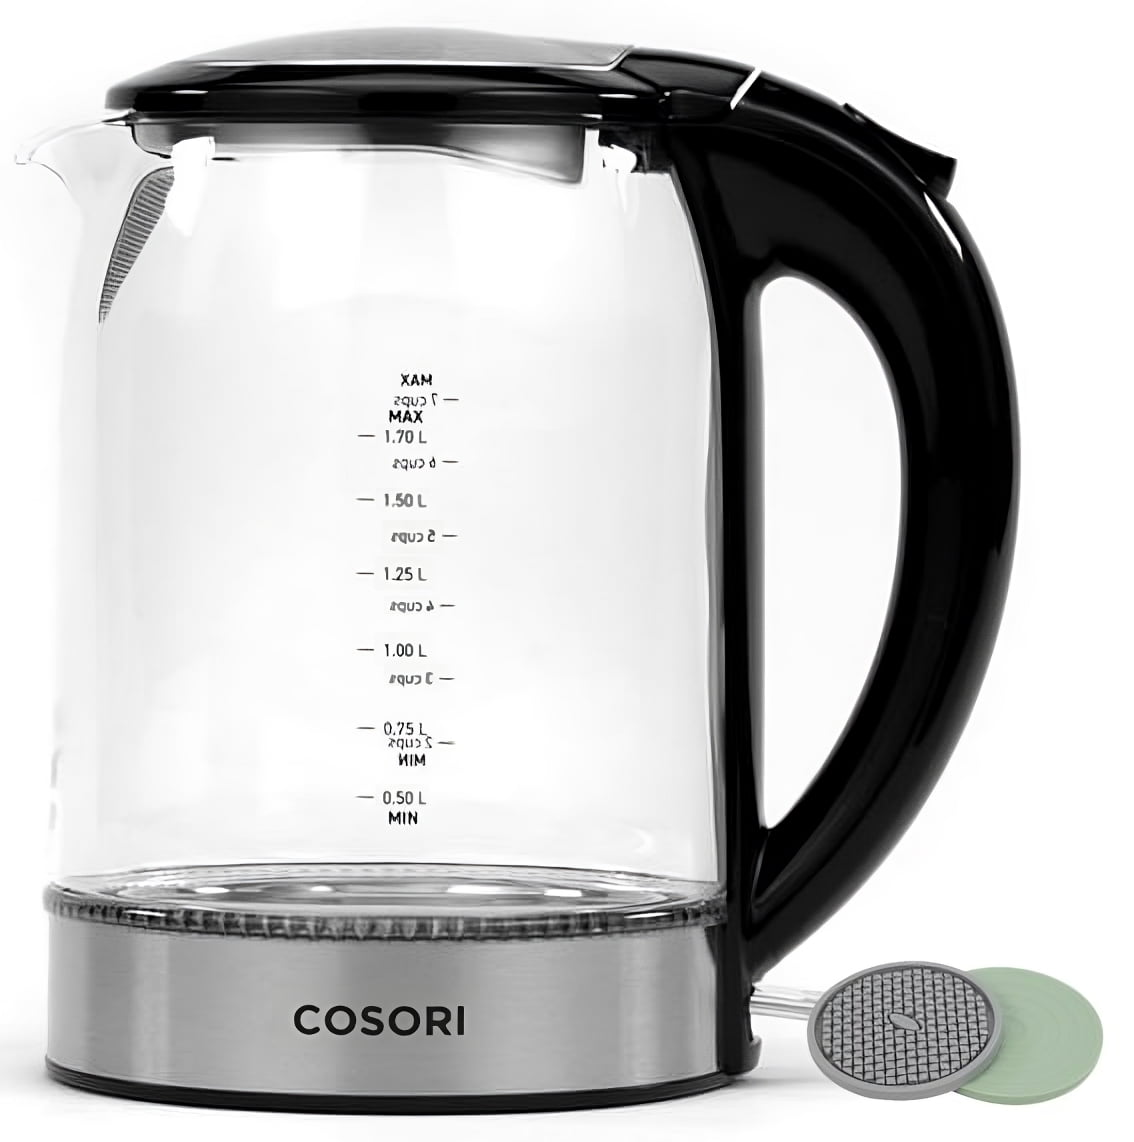 Basics Electric Glass and Steel Kettle - 1.7-Liter